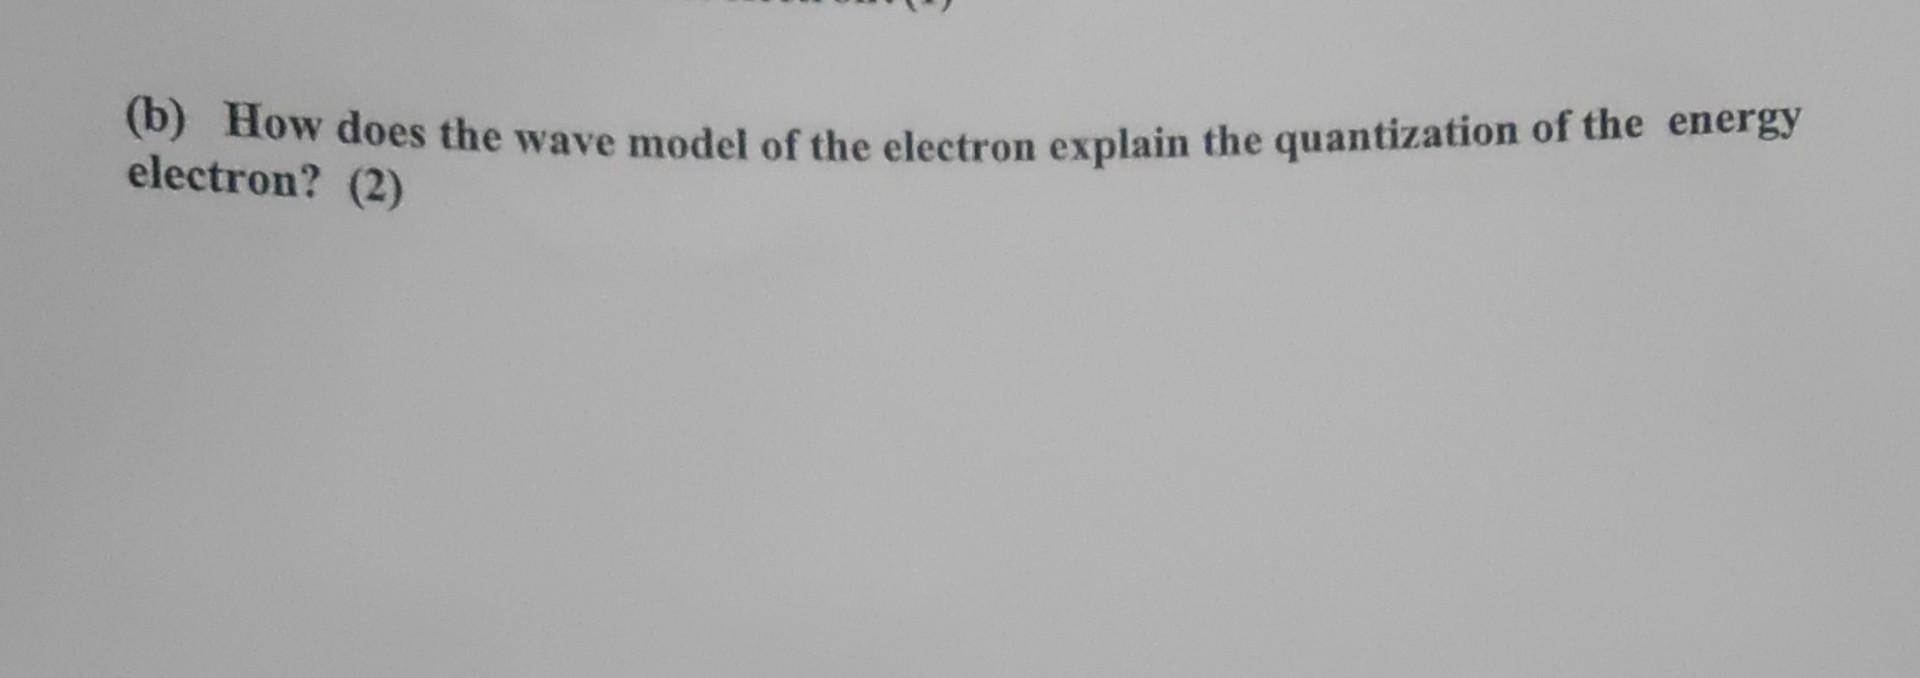 (b) How does the wave model of the electron explain the quantization of the energy electron? (2)